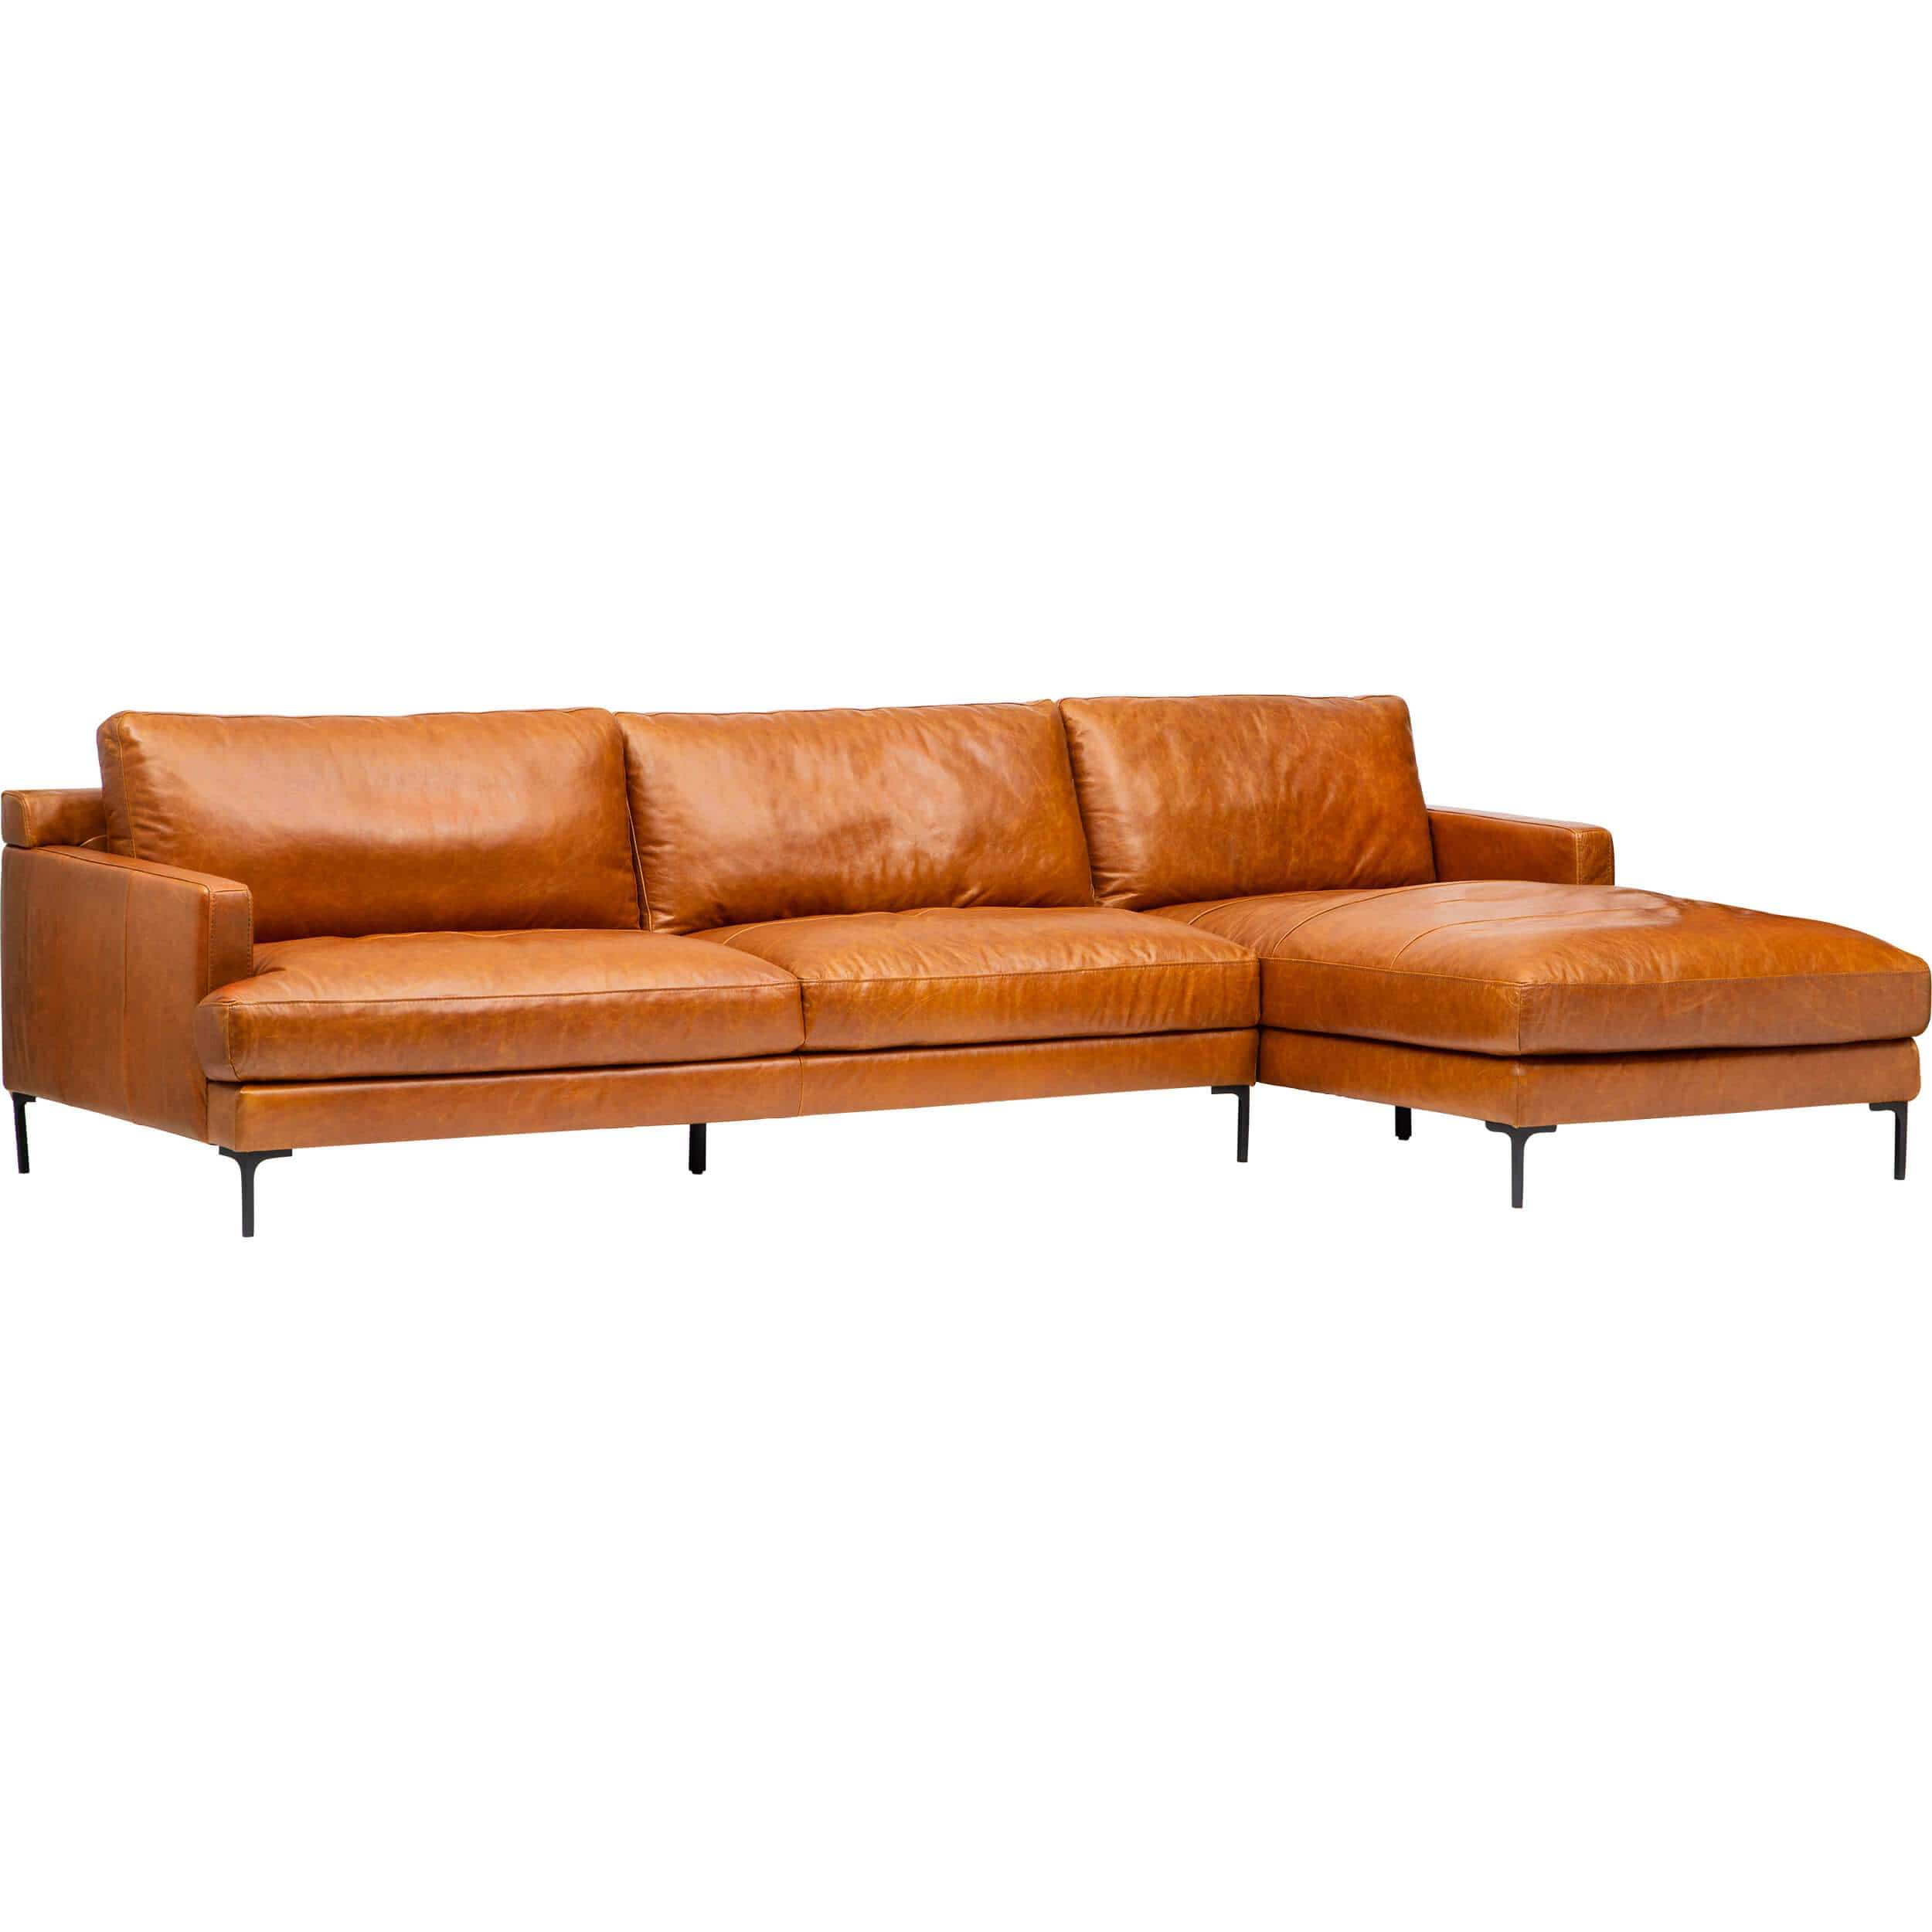 Image of Ansel Leather Sectional, Oil Buffalo Camel